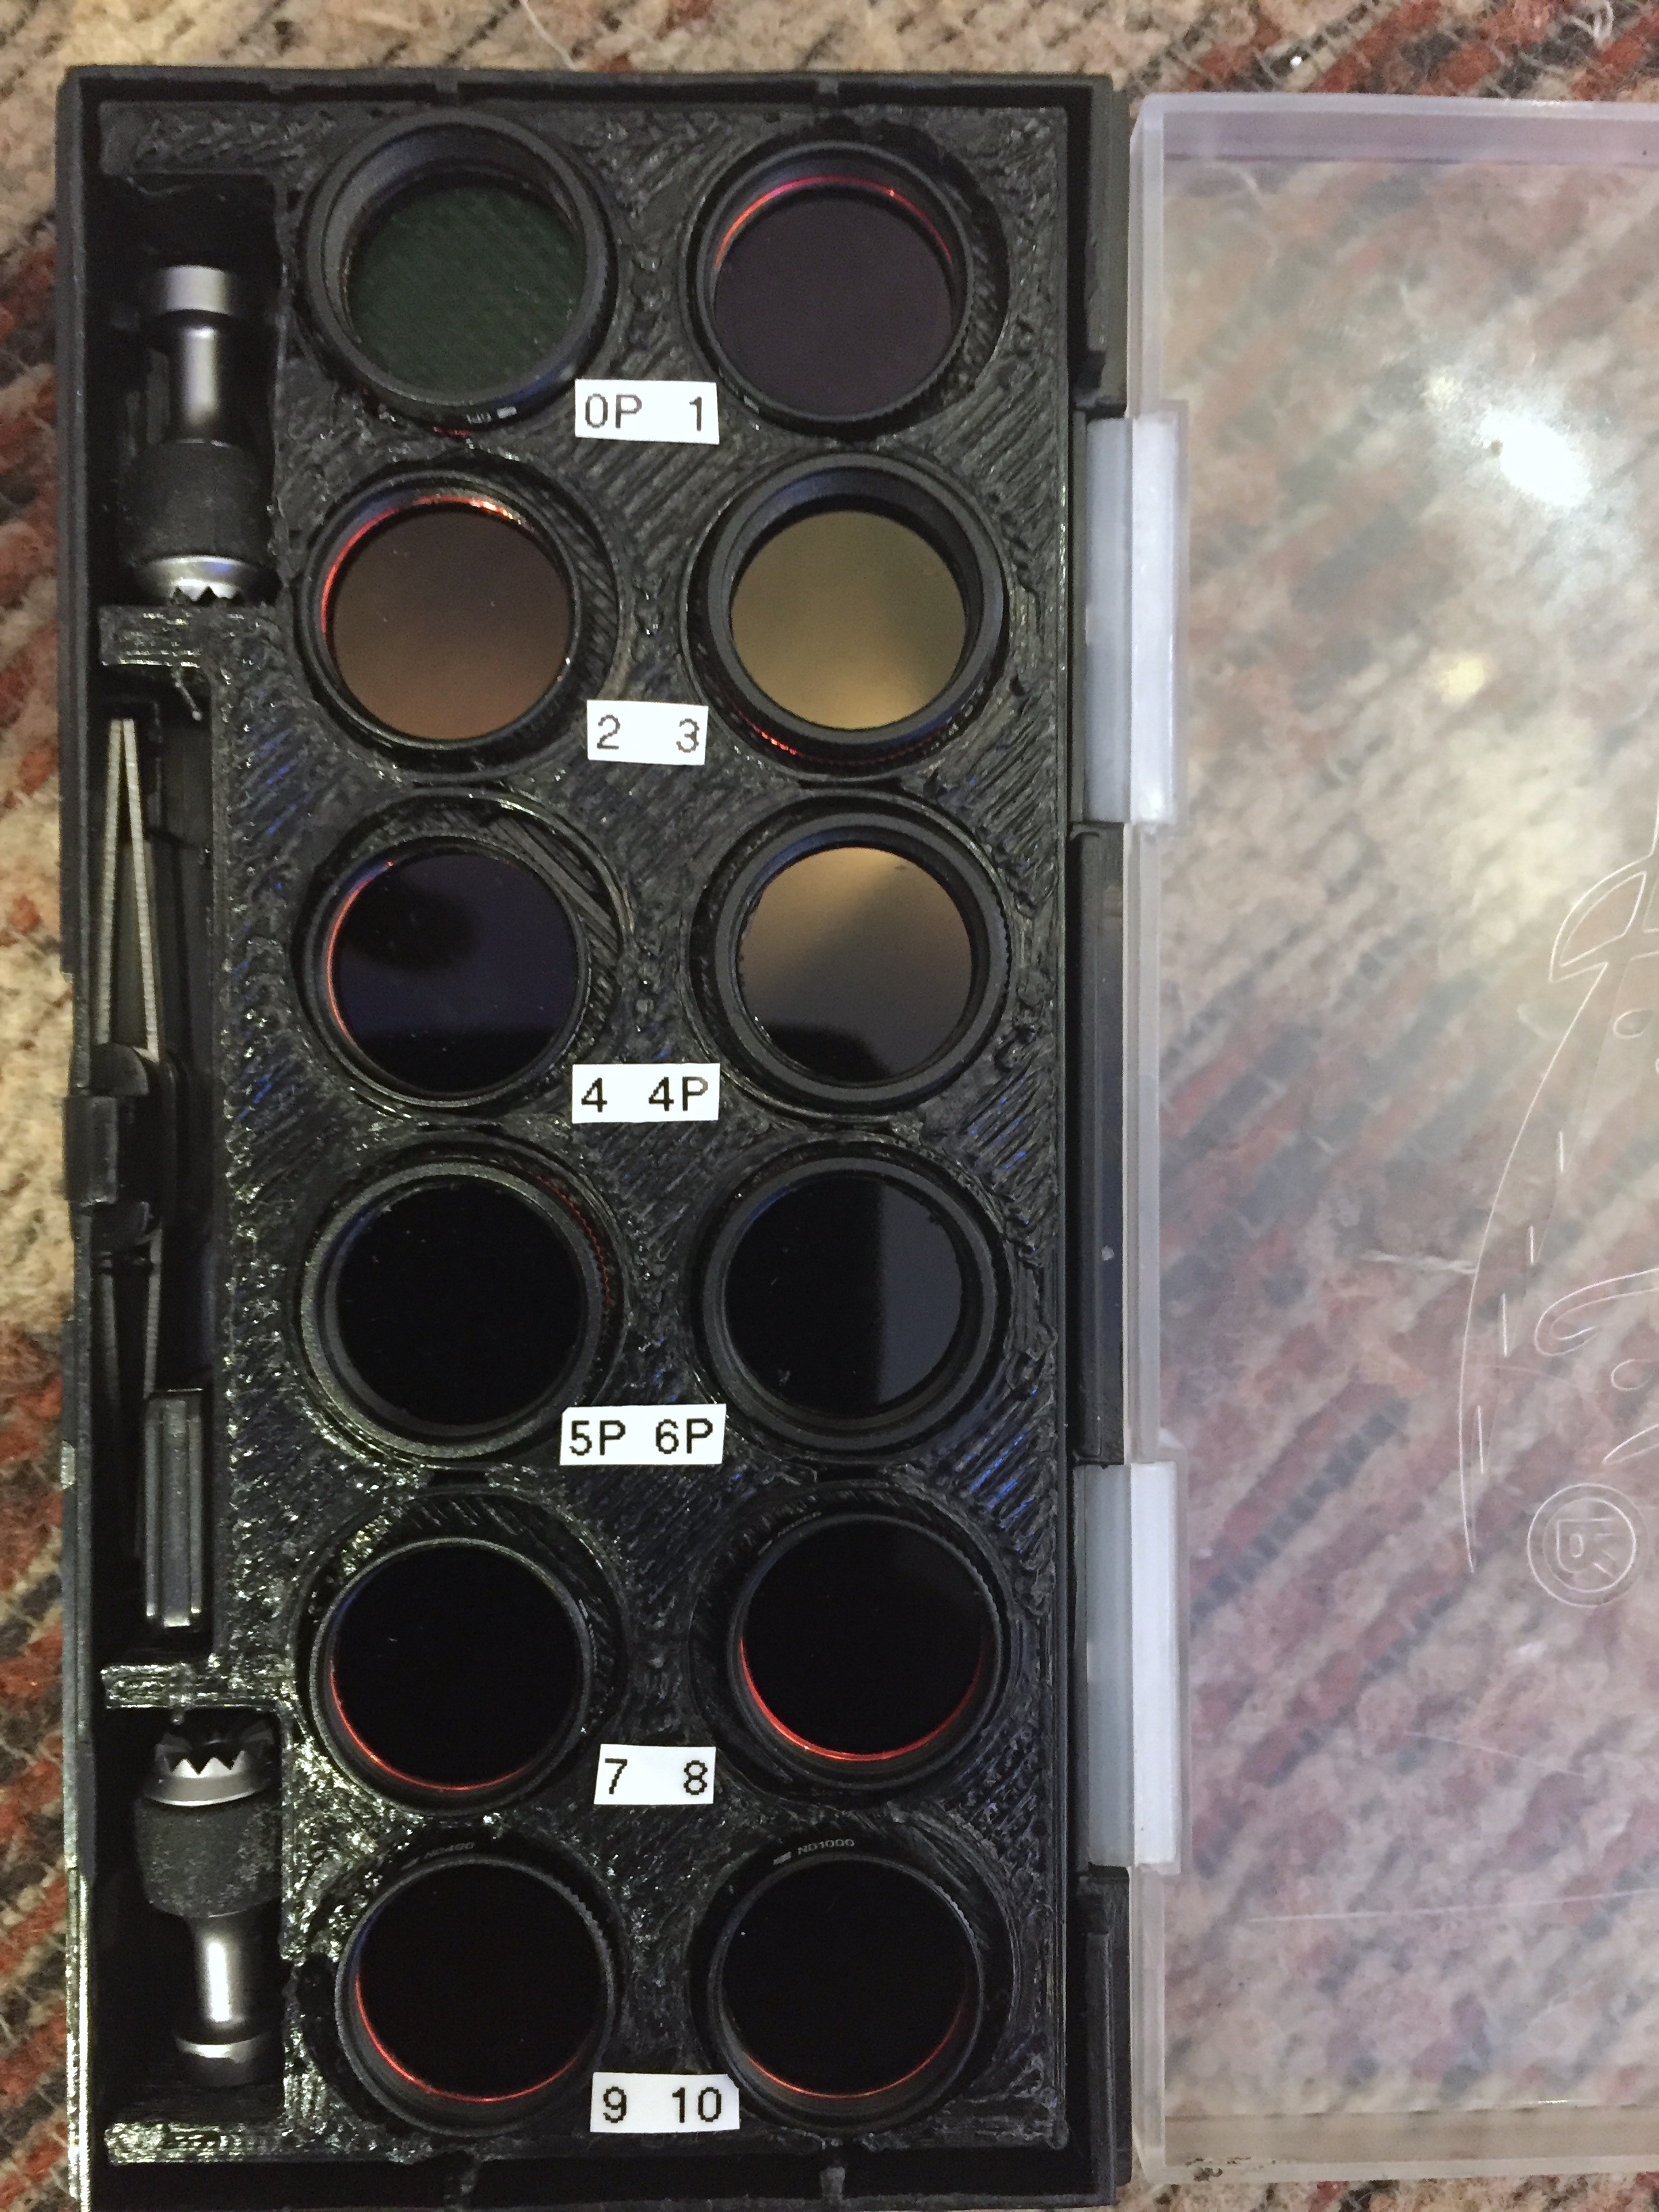 Filter tray labeled